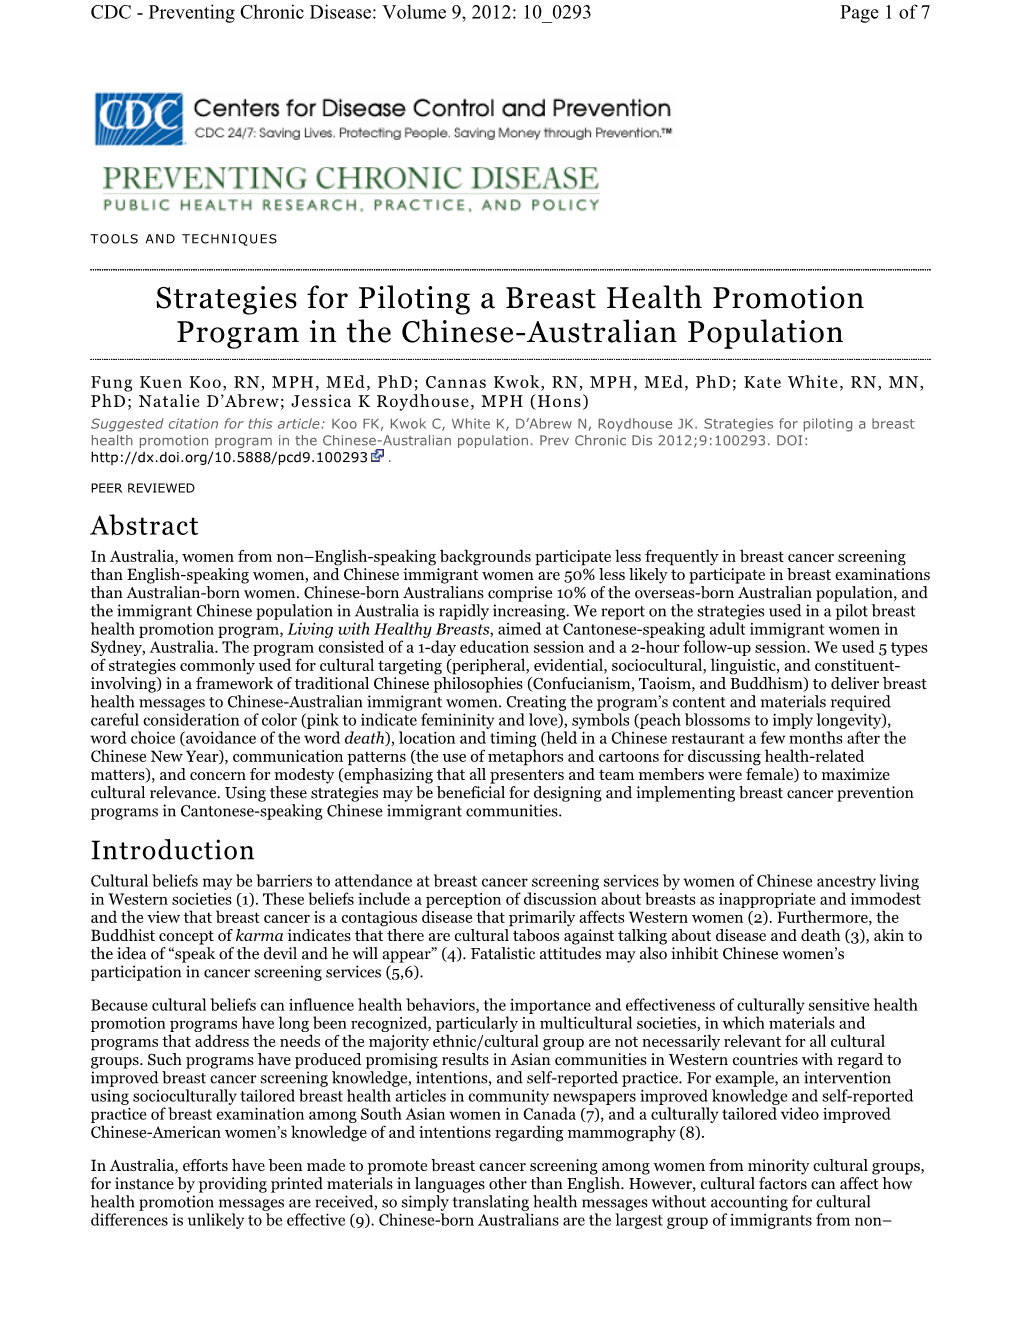 Strategies for Piloting a Breast Health Promotion Program in the Chinese-Australian Population